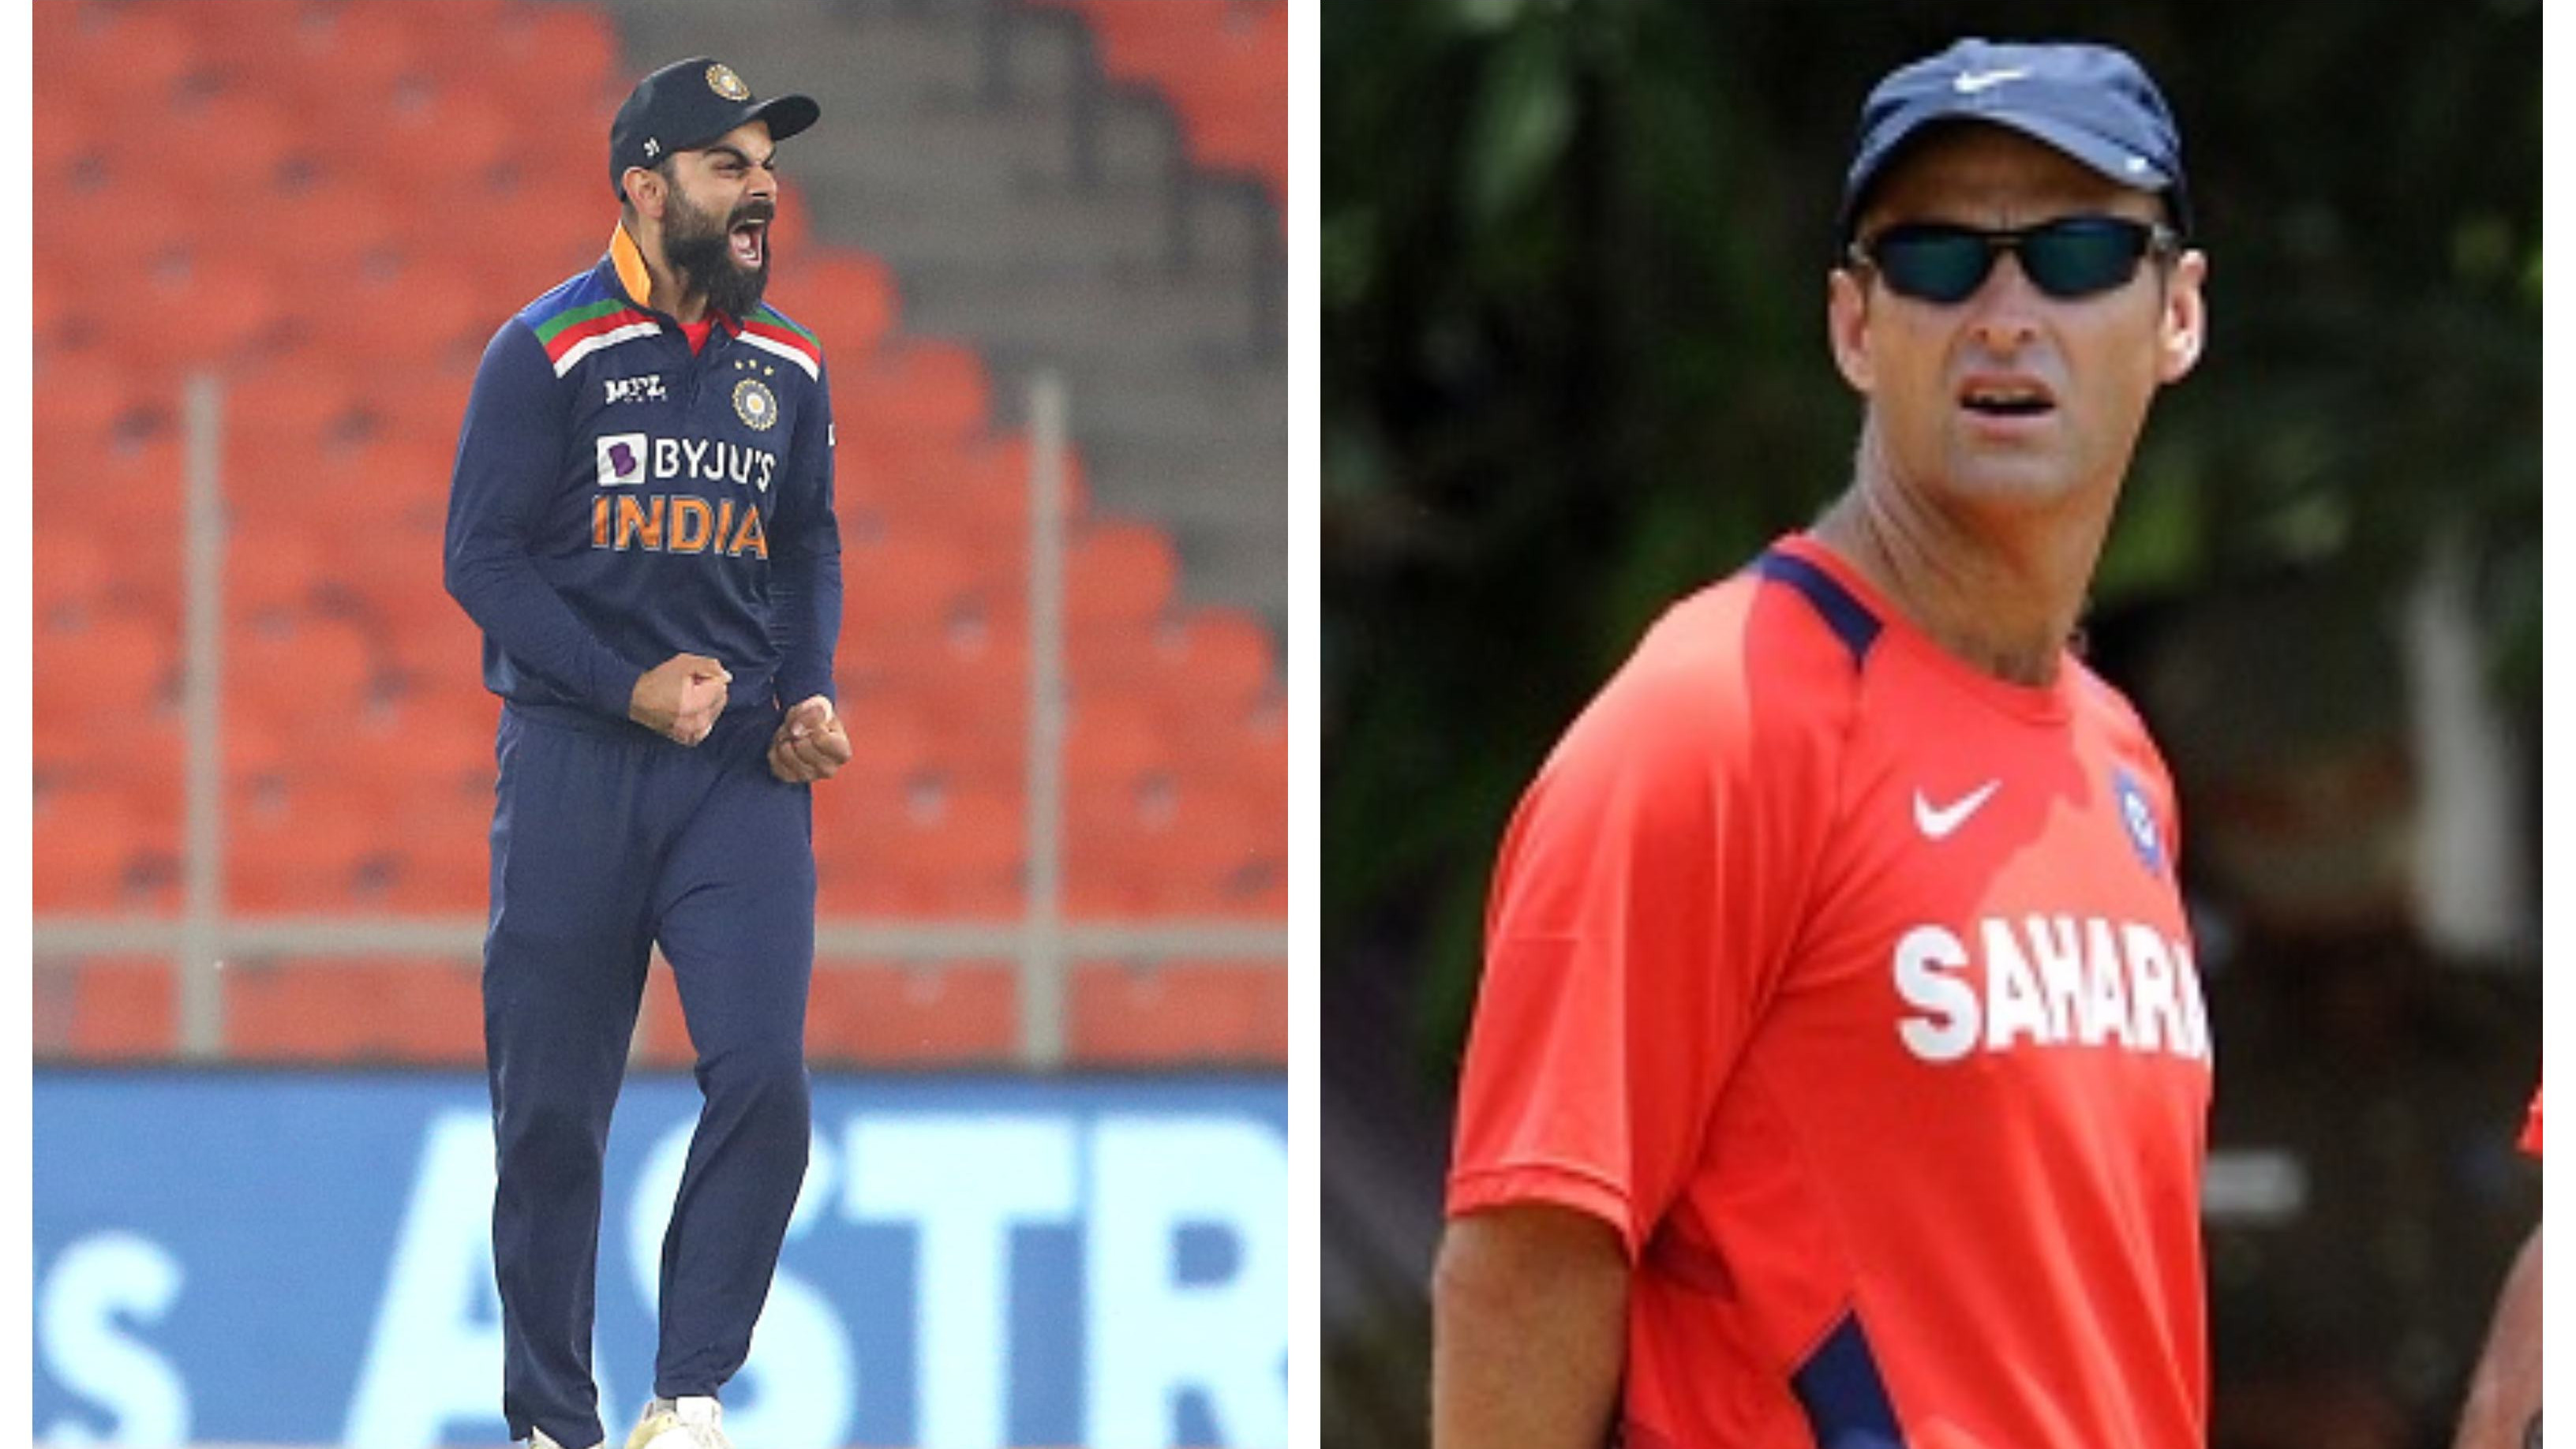 ‘He is doing a fantastic job for his country’, Gary Kirsten impressed with Virat Kohli’s captaincy skills